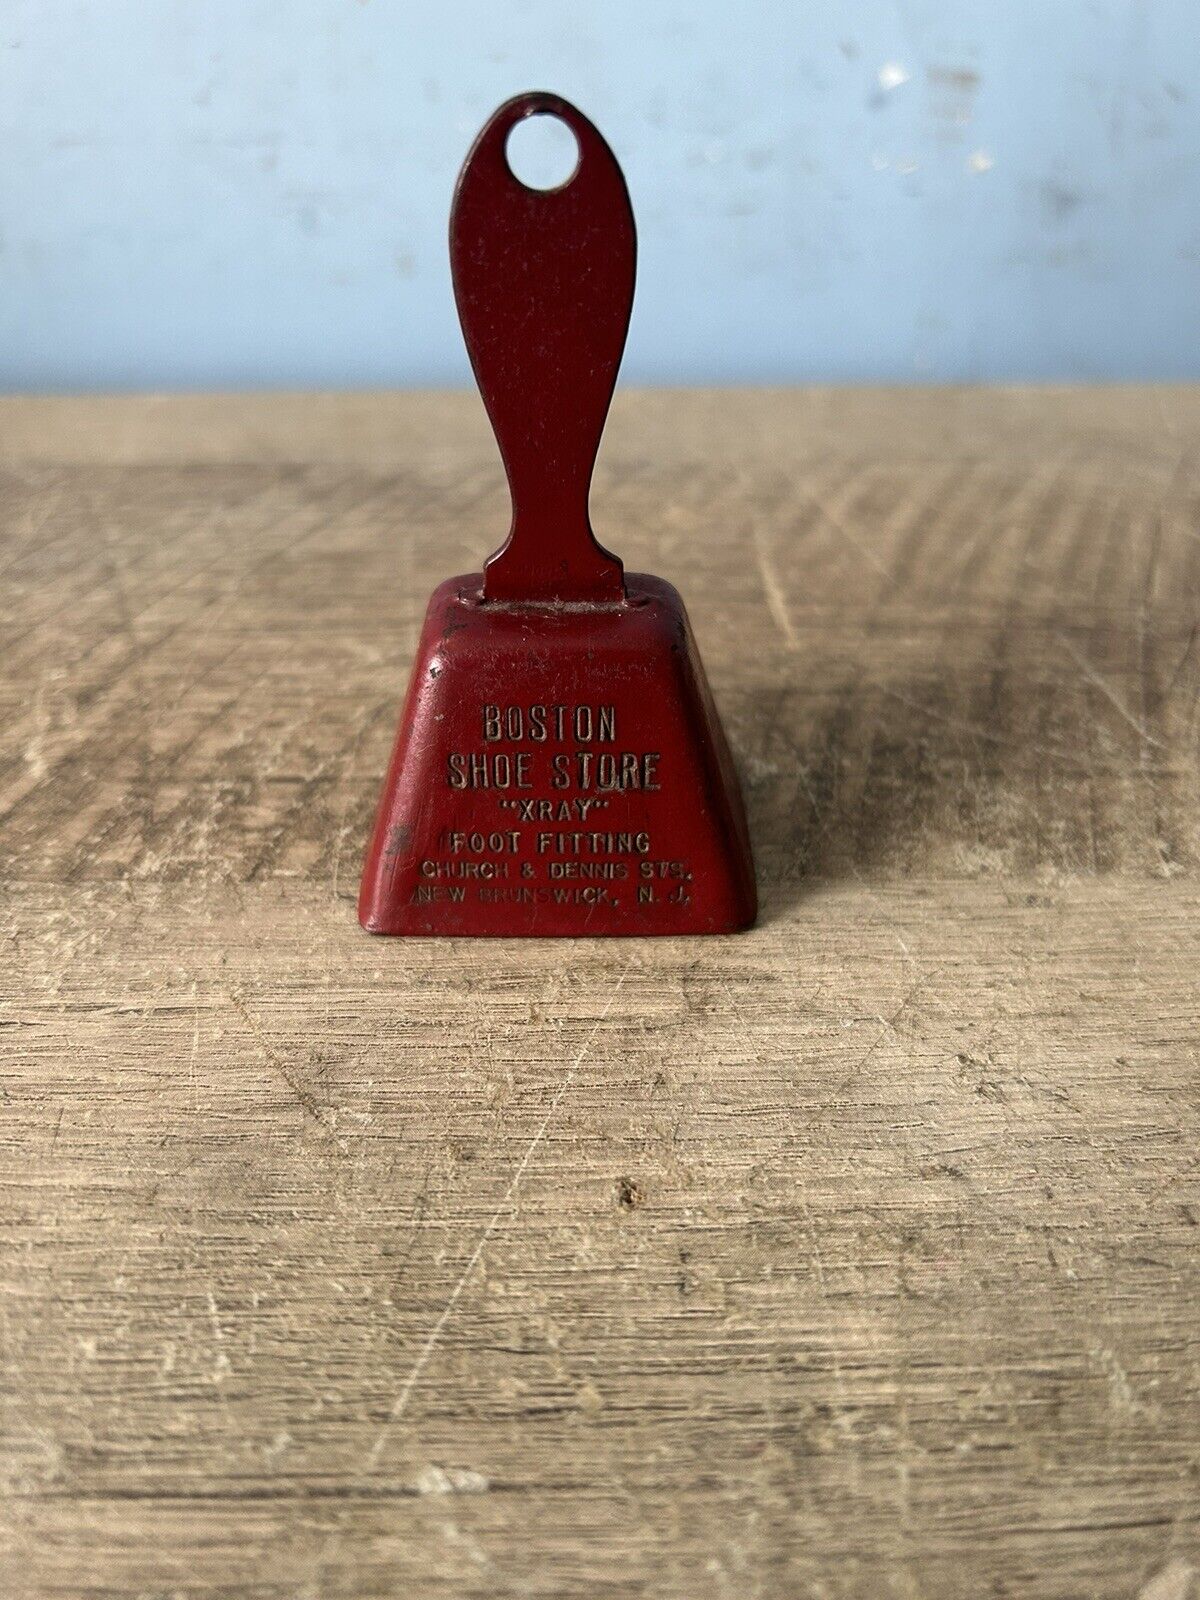 Antique 1920s Boston Shoe Store Promotional Advertising Bell